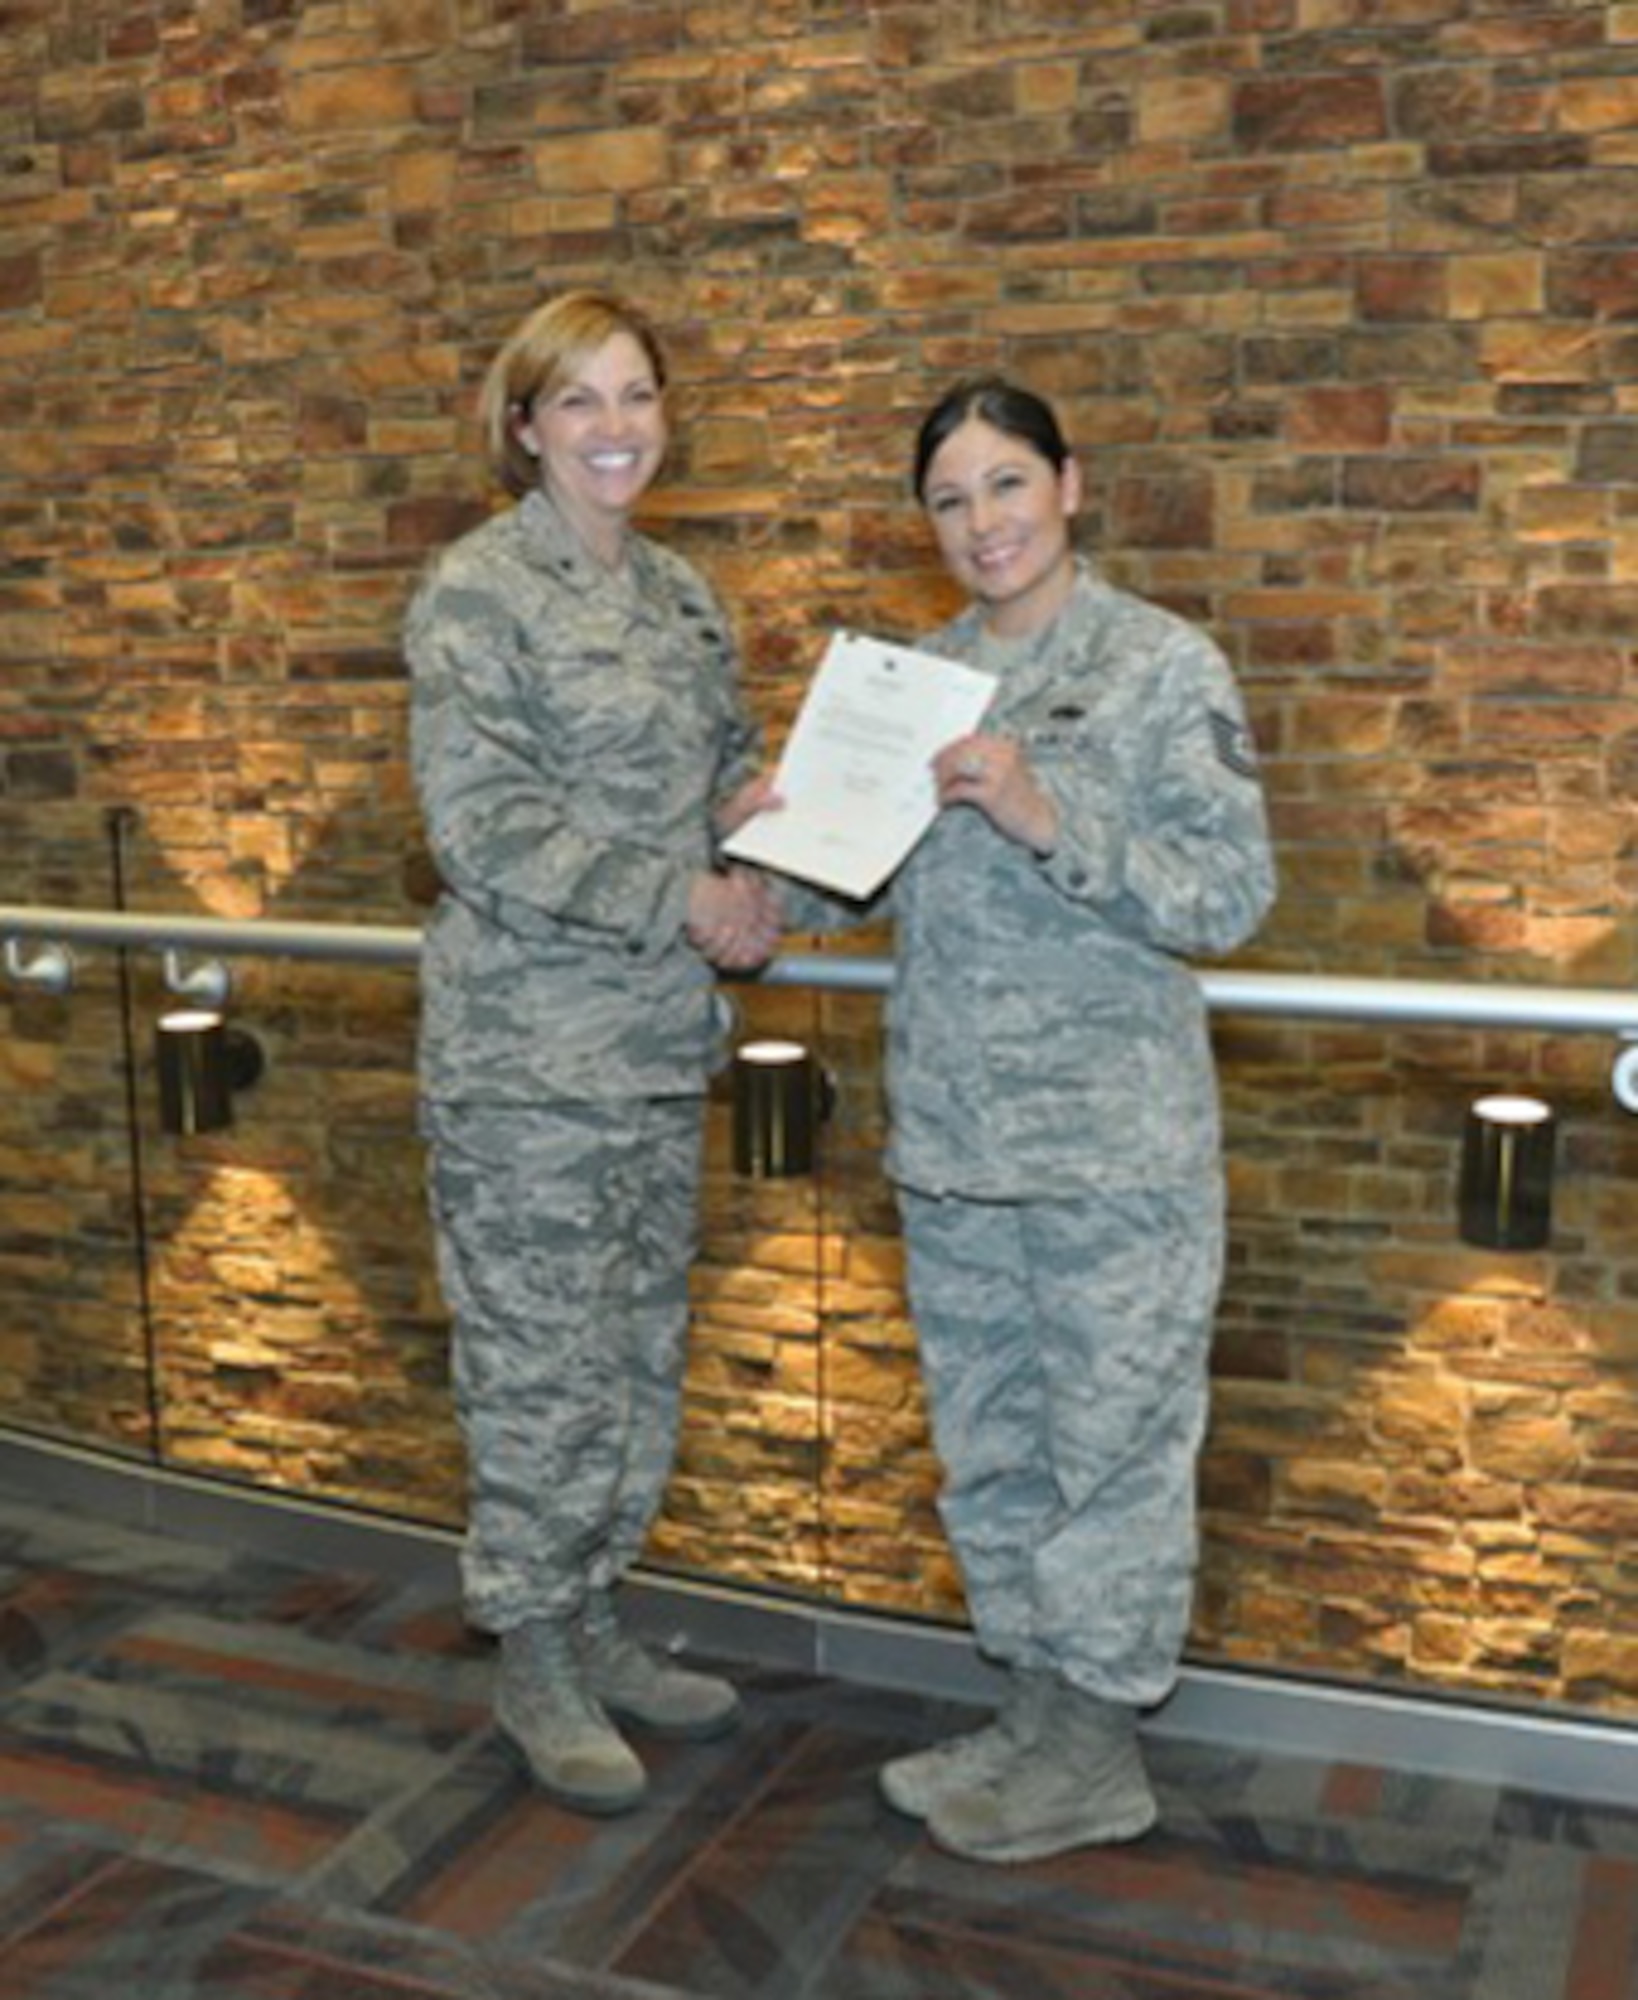 Brig. Gen. Ellen Moore (left), Air Reserve Personnel Center commander, presents Tech. Sgt. Amee Espinoza, Personnel Customer Service Manager for the ARPC Total Force Service Center, with a letter of congratulations from Lt. Gen. Maryanne Miller, commander of Air Force Reserve Command, for her selection as the AFRC nomination for the 2016 GEICO Military Service Award. Espinoza completed more than 600 hours of direct and indirect counseling services with individuals and groups focused on DUI and DWIs, addiction, domestic violence, conflict resolution, and anger management. (U.S. Air Force photo by Master Sgt. Beth Anschutz)